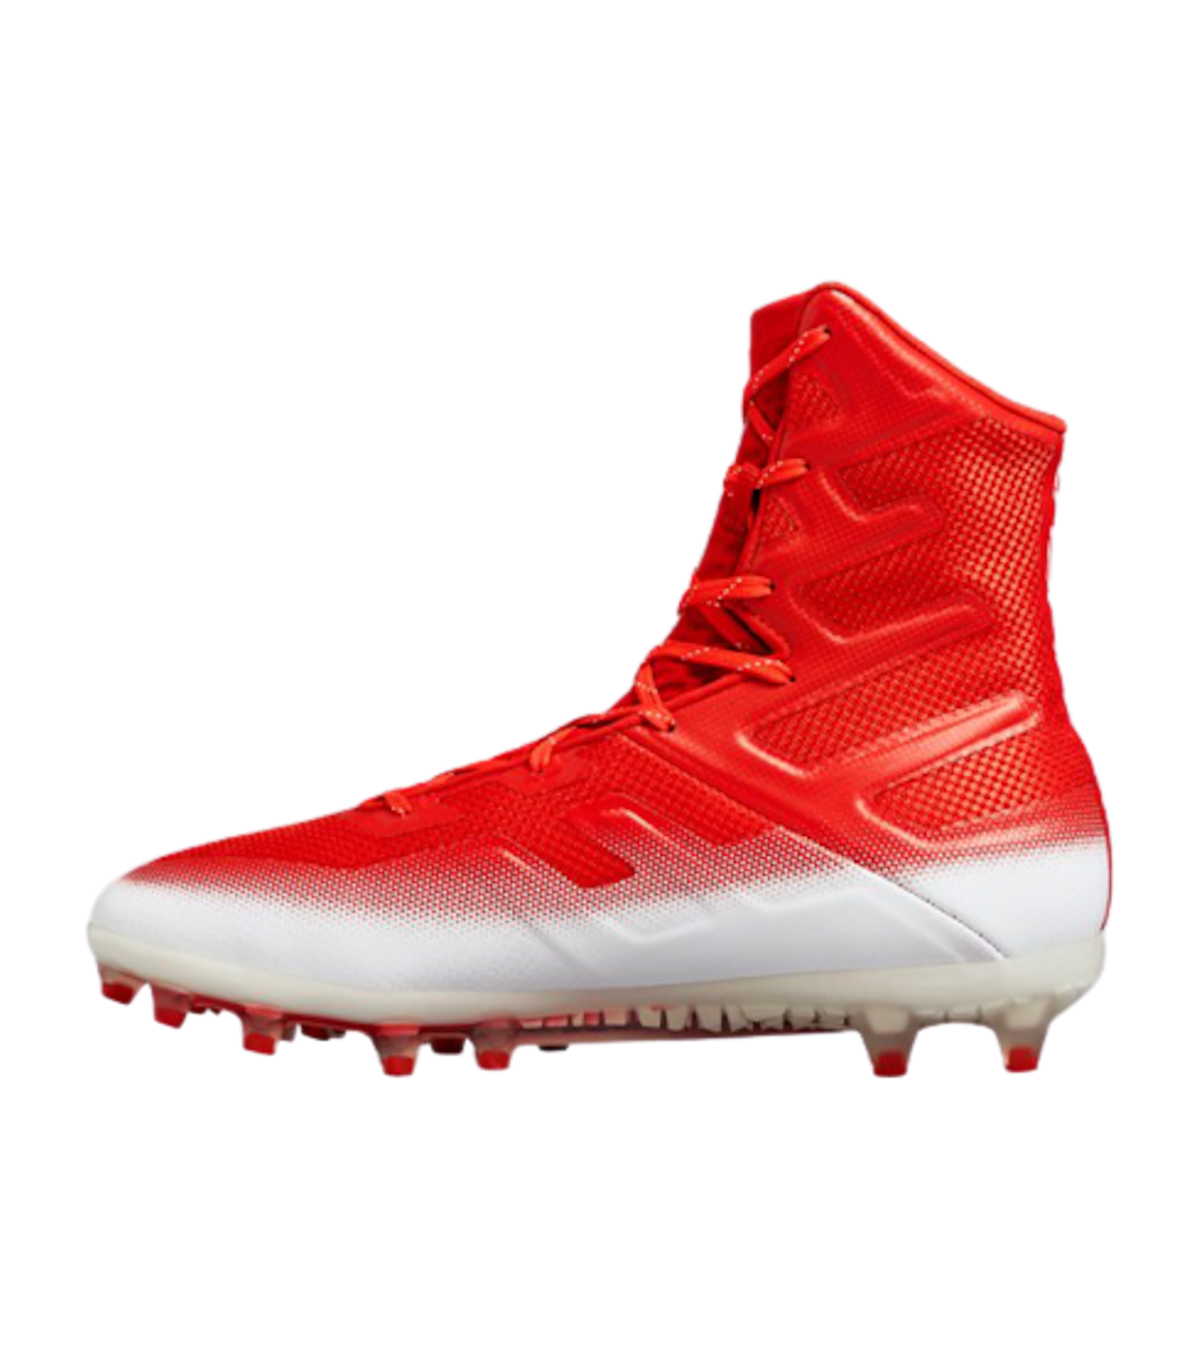 Under Armour Highlight MC High Top Football Cleat Red White 3000177-601 Size 12 